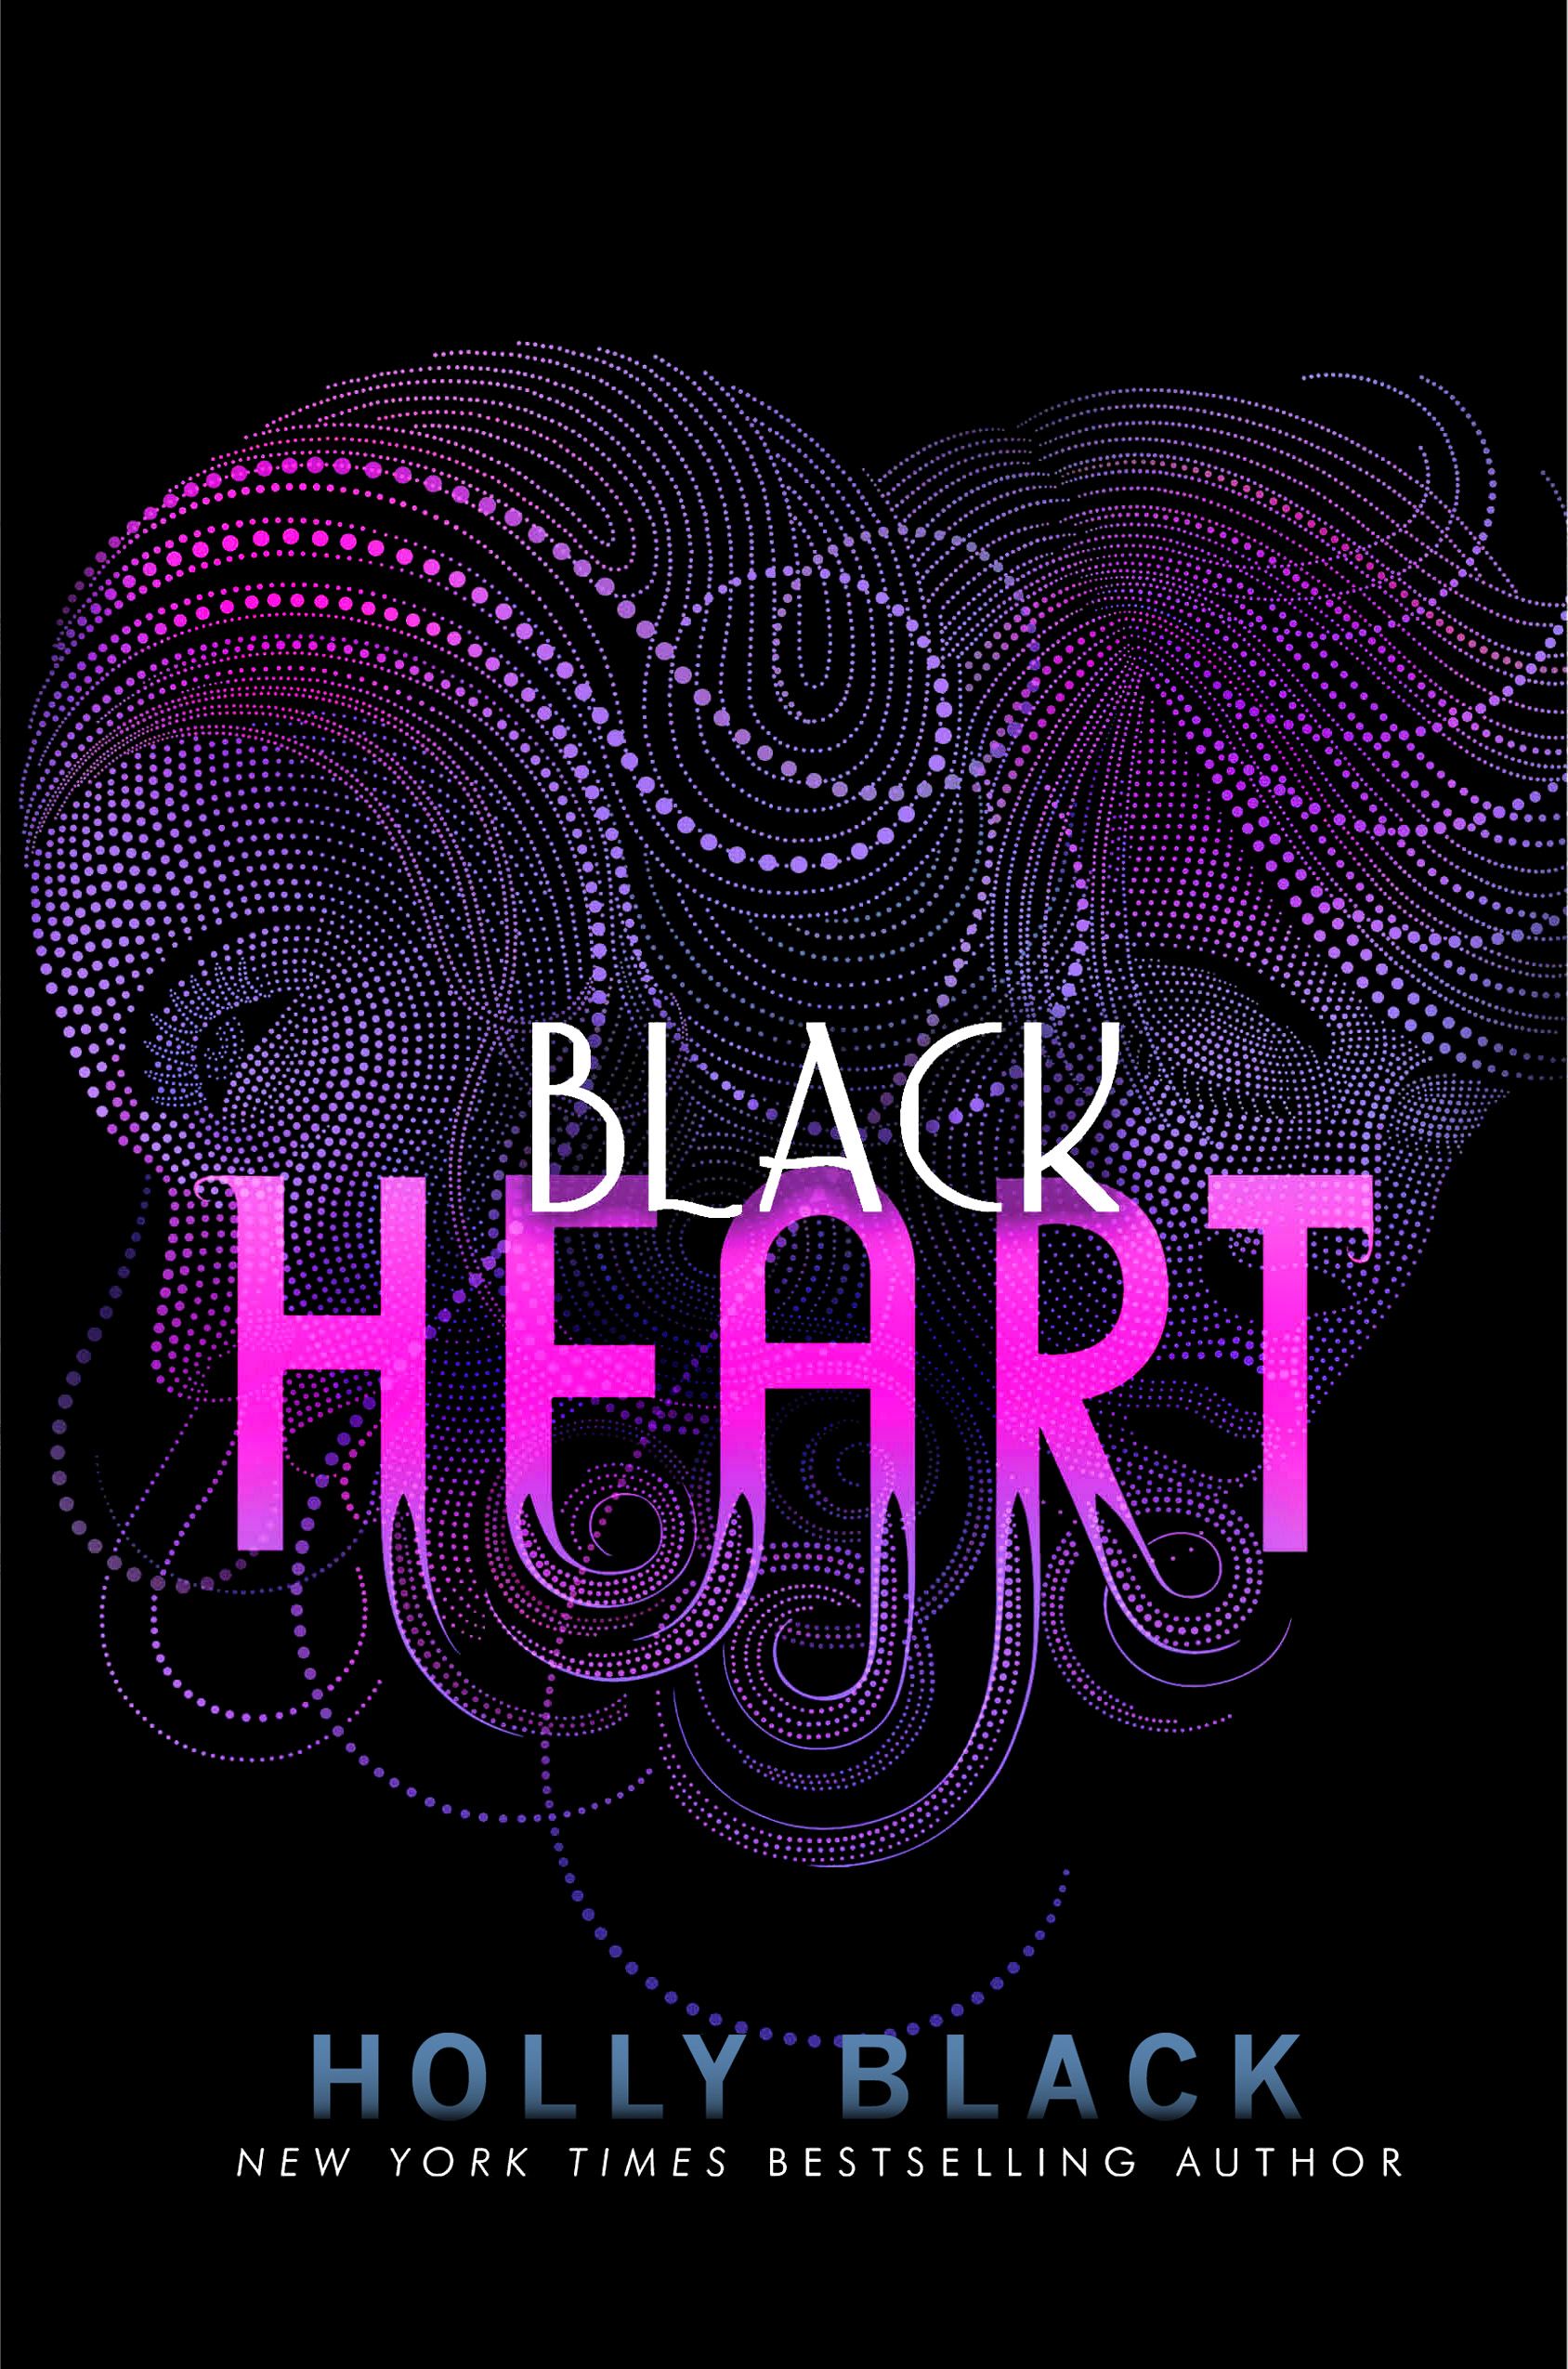 The Curse Workers: Black Heart (Series #3) (Paperback) - image 1 of 1